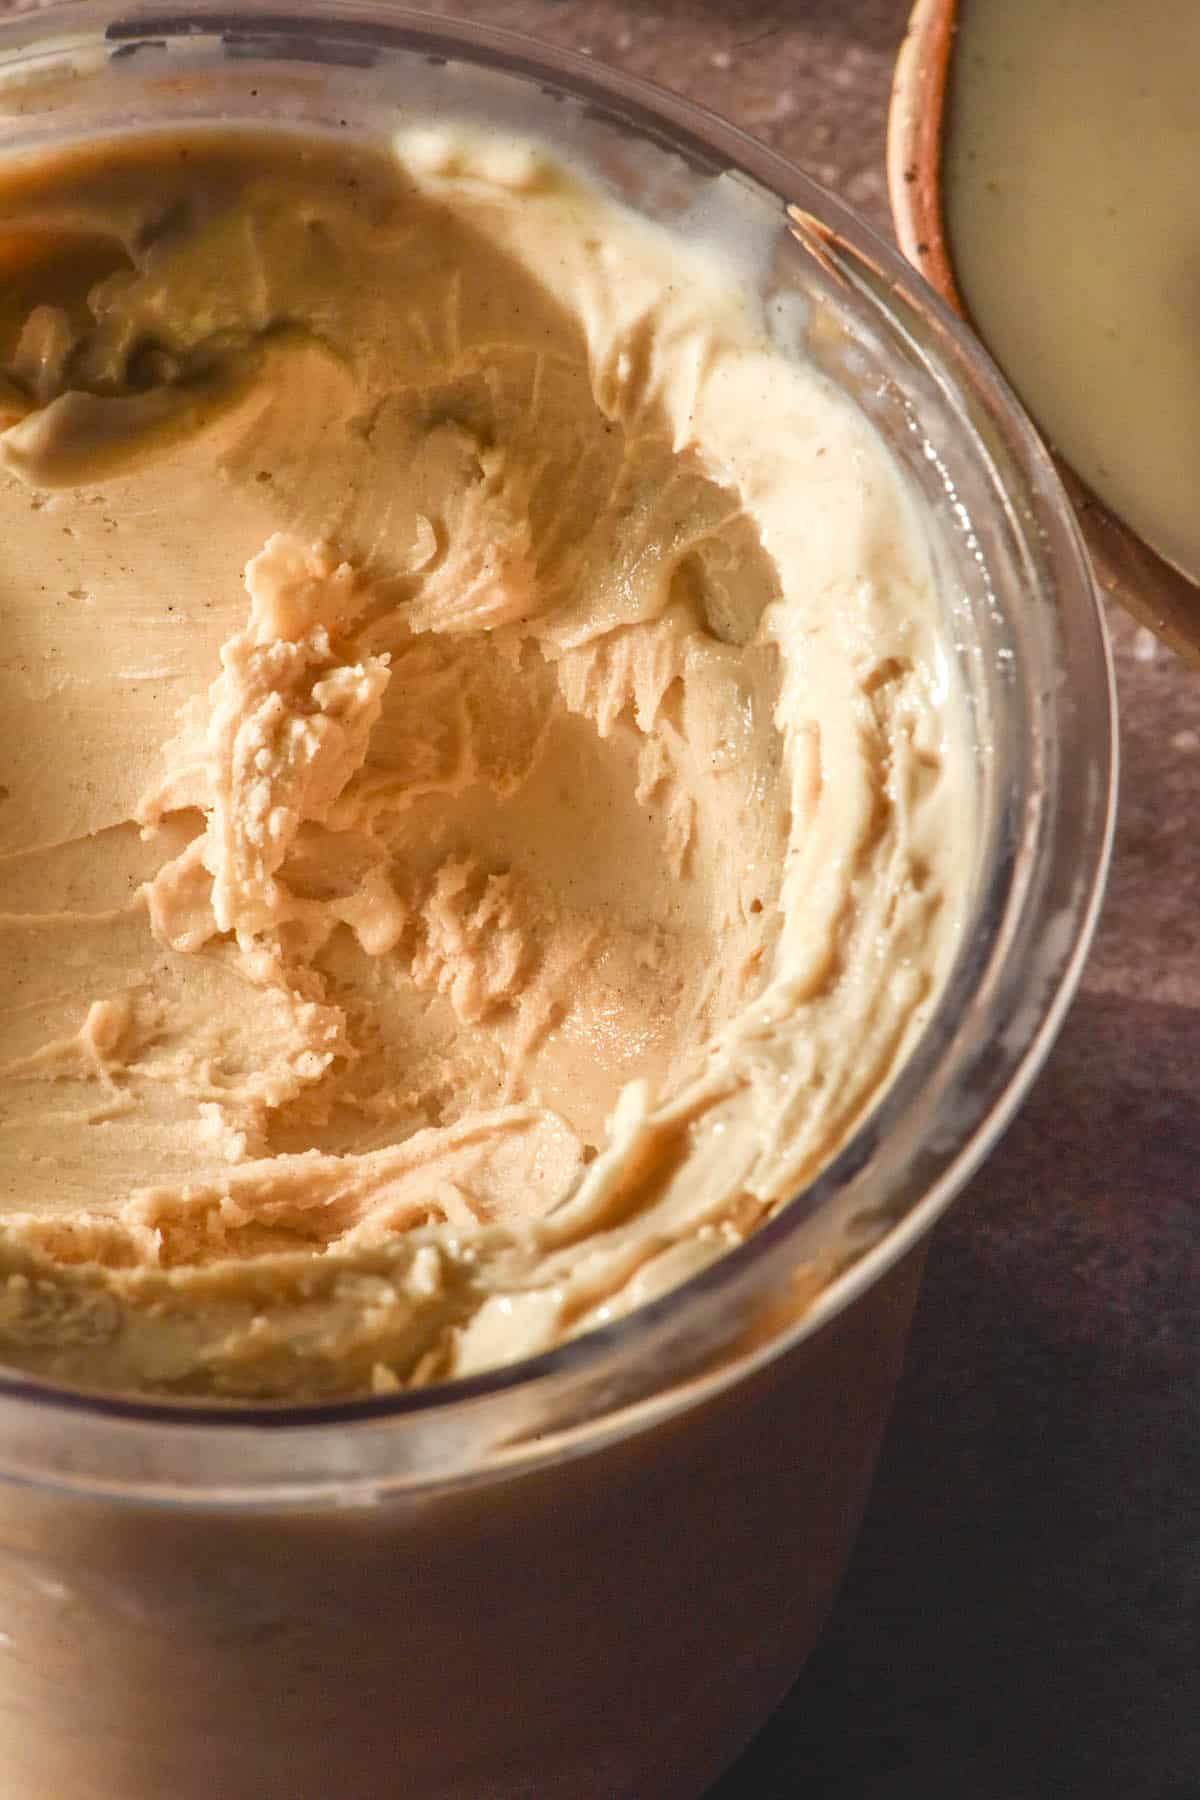 A side on warm toned image of a tub of high protein Ninja Creami ice cream